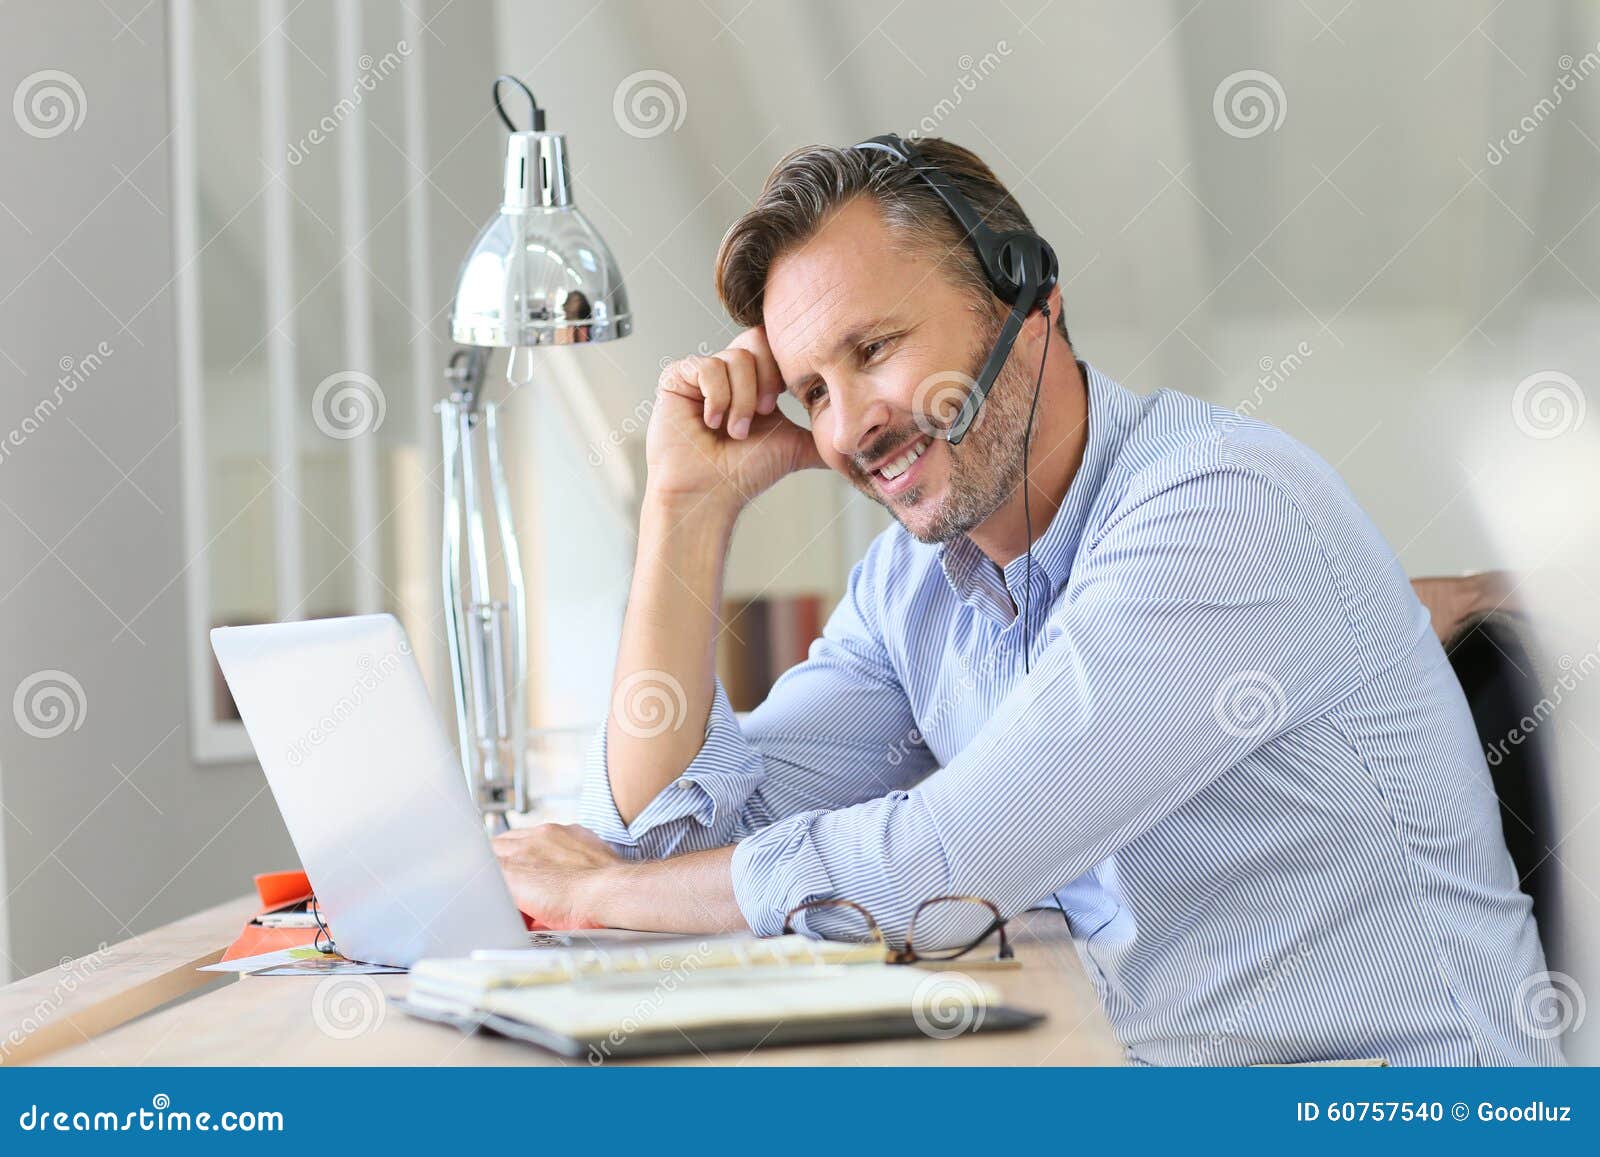 businessman with headset teleworking on laptop